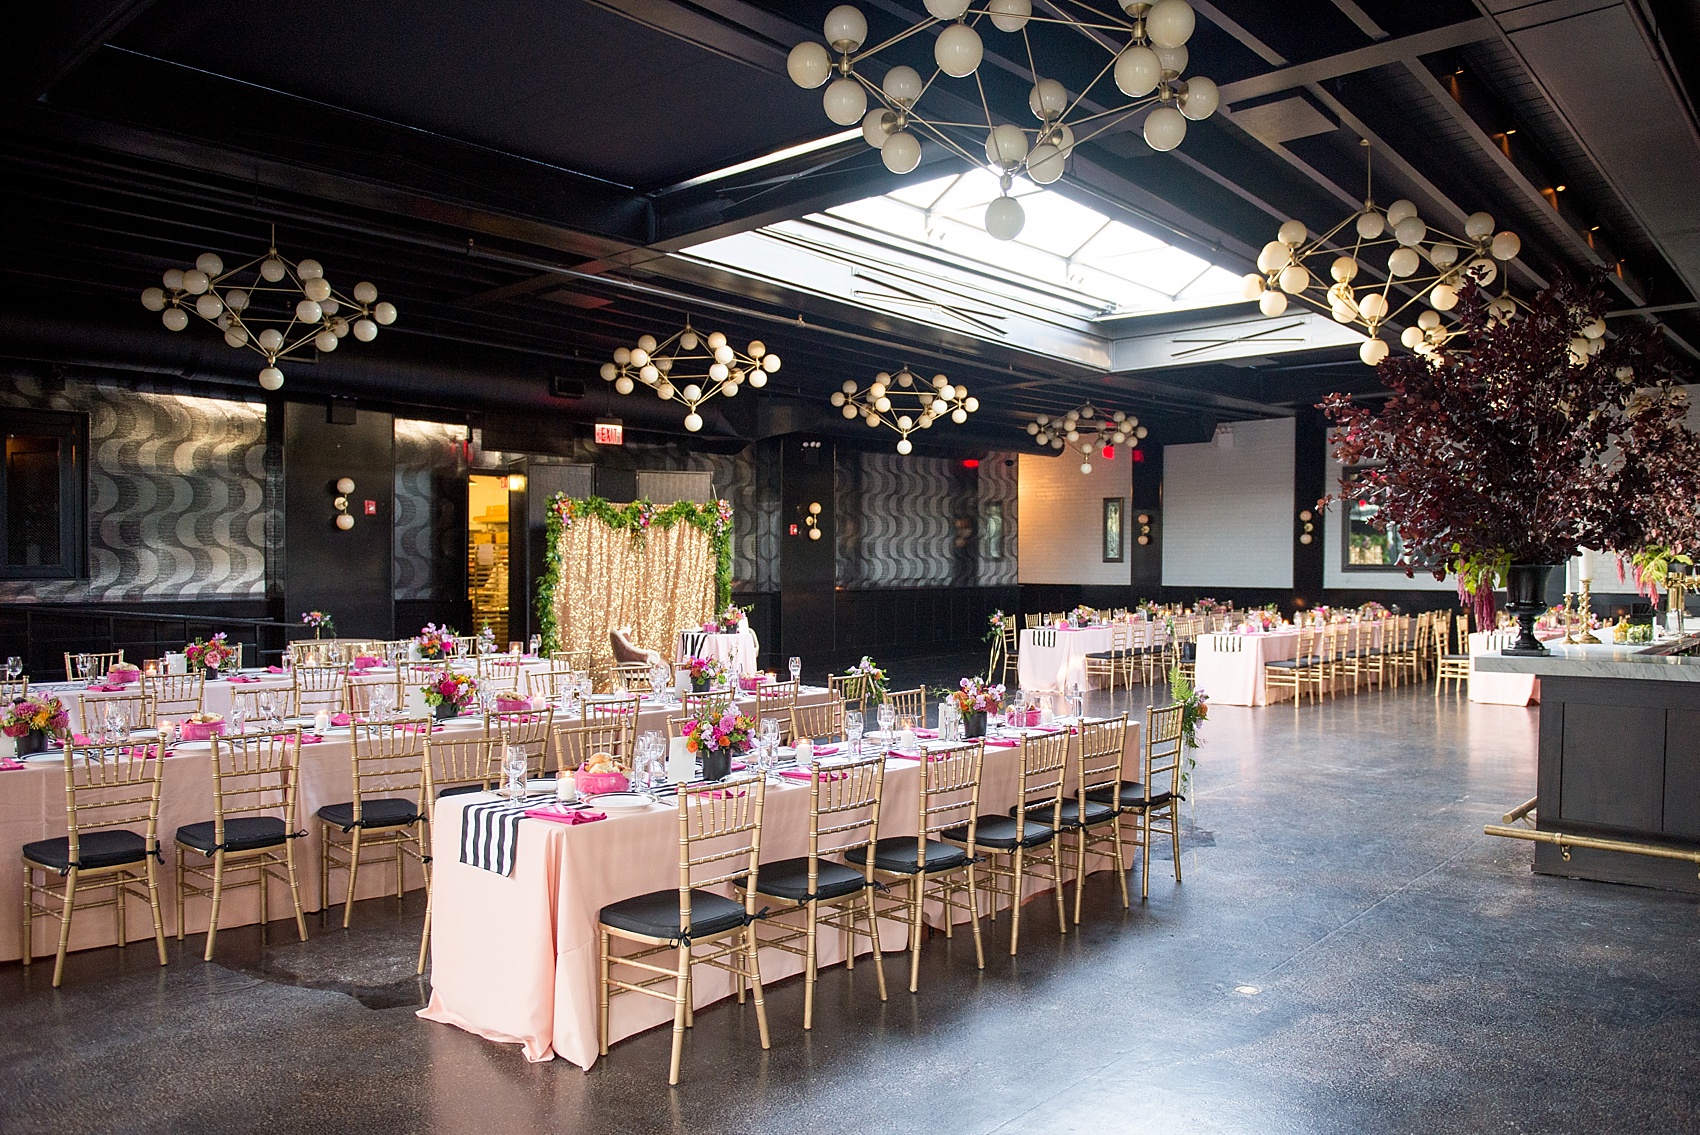 501 Union lesbian wedding. Photos by Mikkel Paige Photography, in Brooklyn, NYC. Planning by Ashley M Chamblin Events. Overall room photo with pink linens and brightly colored flower centerpieces. Gold sequin backdrop.